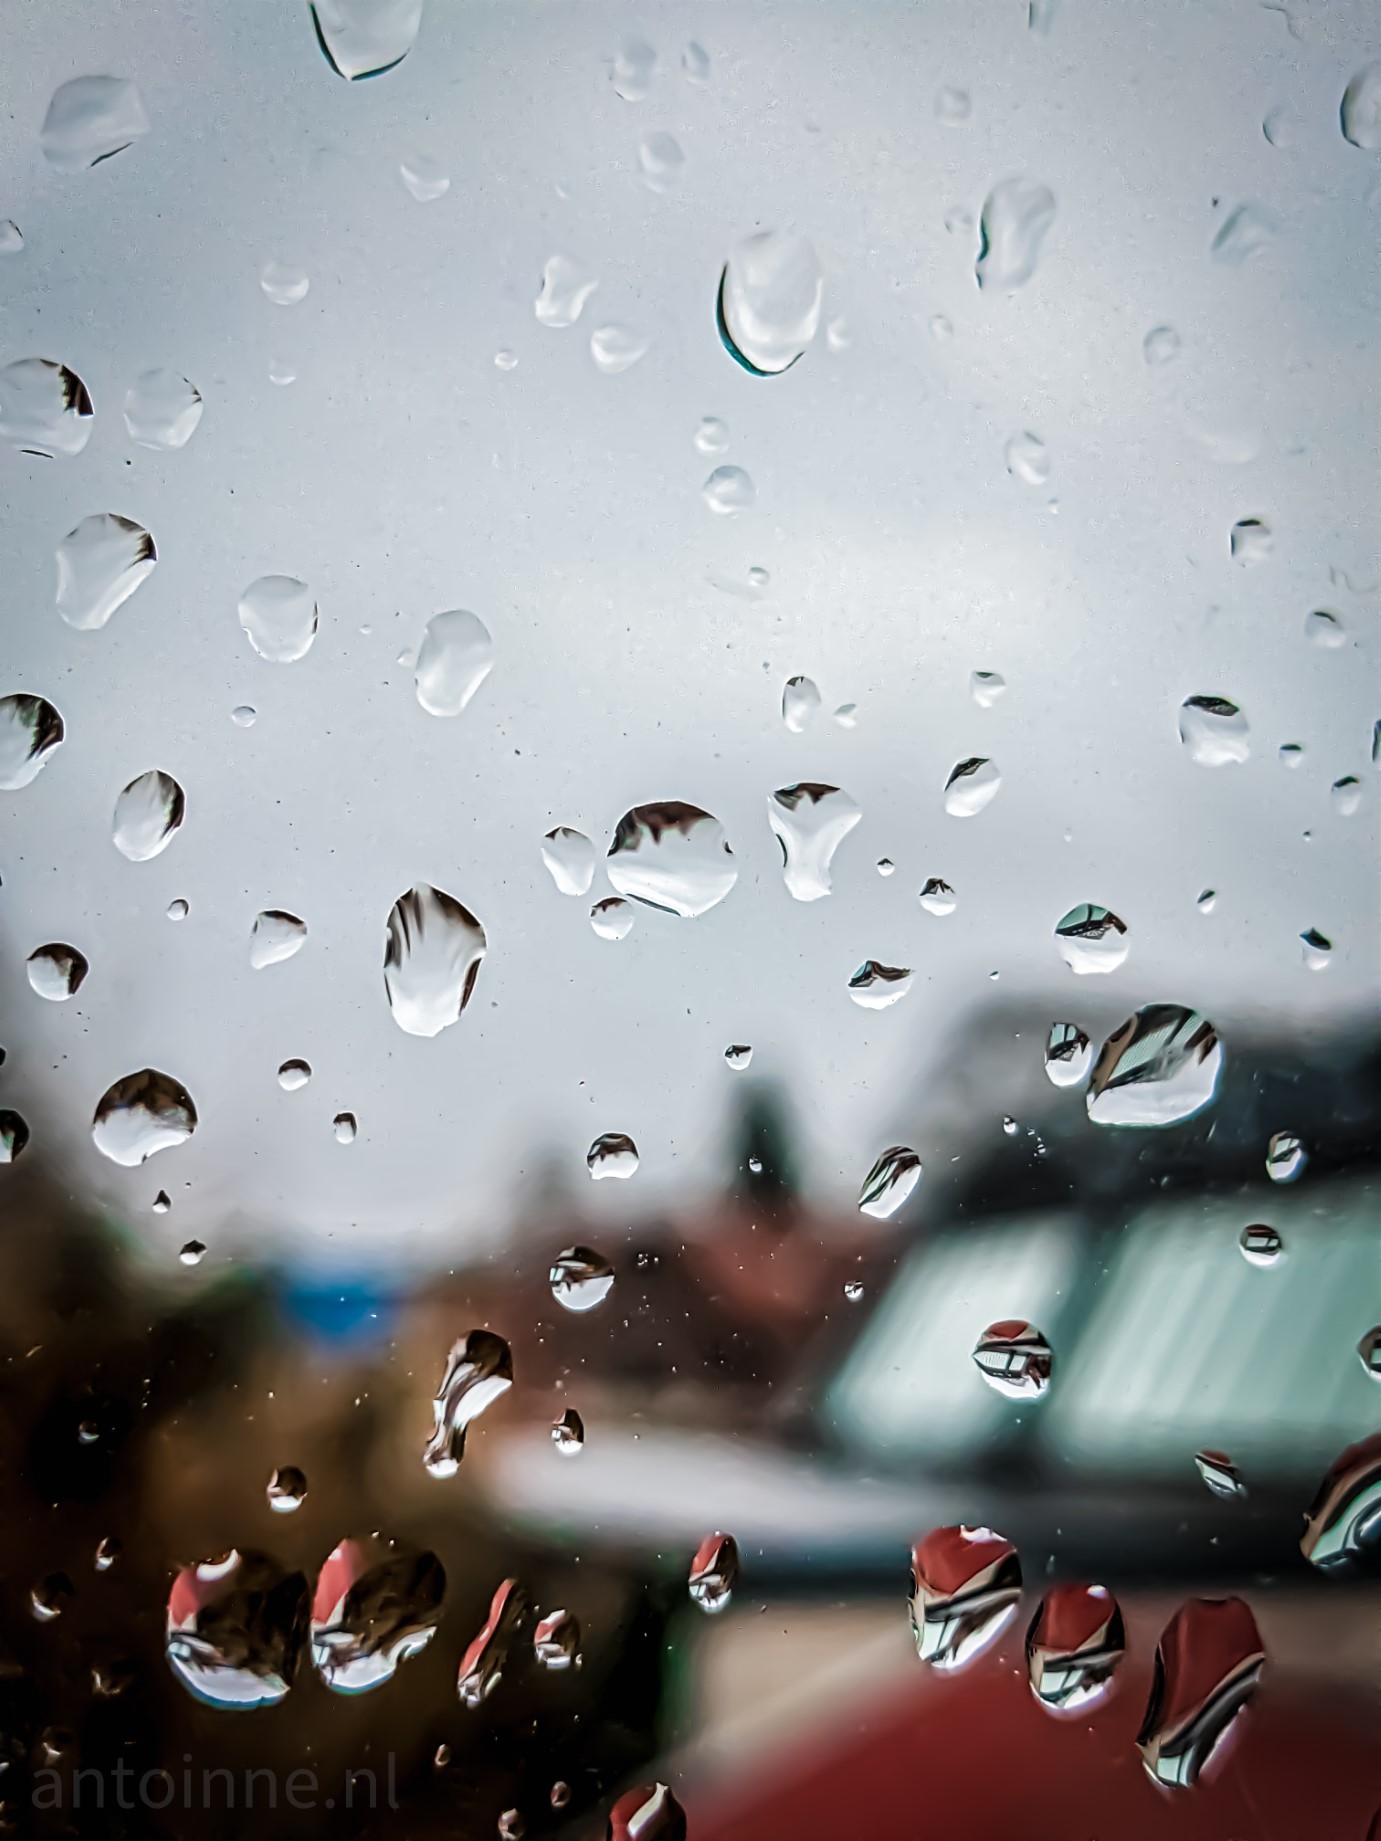 A close-up shot of raindrops on a window. The roofs of other houses are visible in the background. Some are red, others have glass. Far away there is also a burned down building with a blue / green tarpaulin.